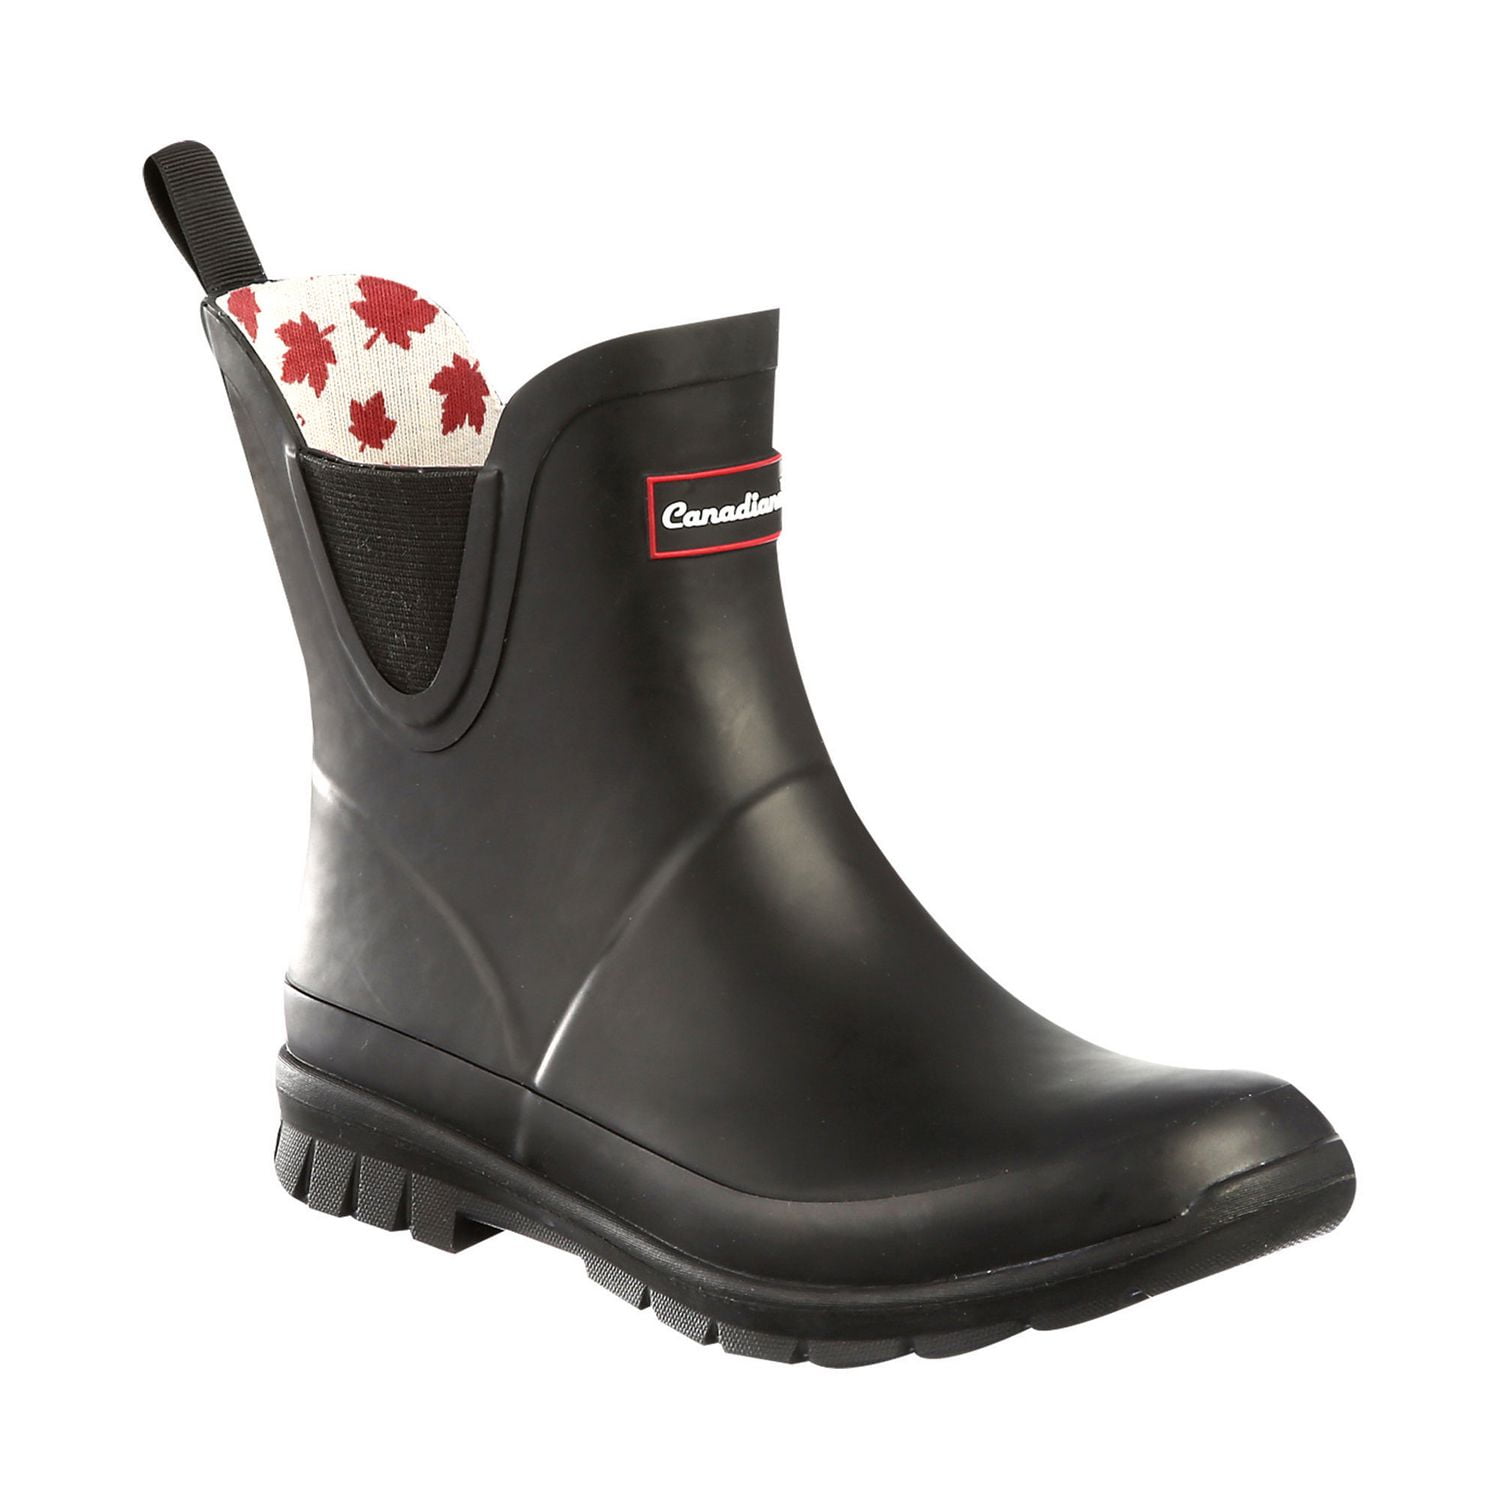 Canadiana Women's Rubber Boots 